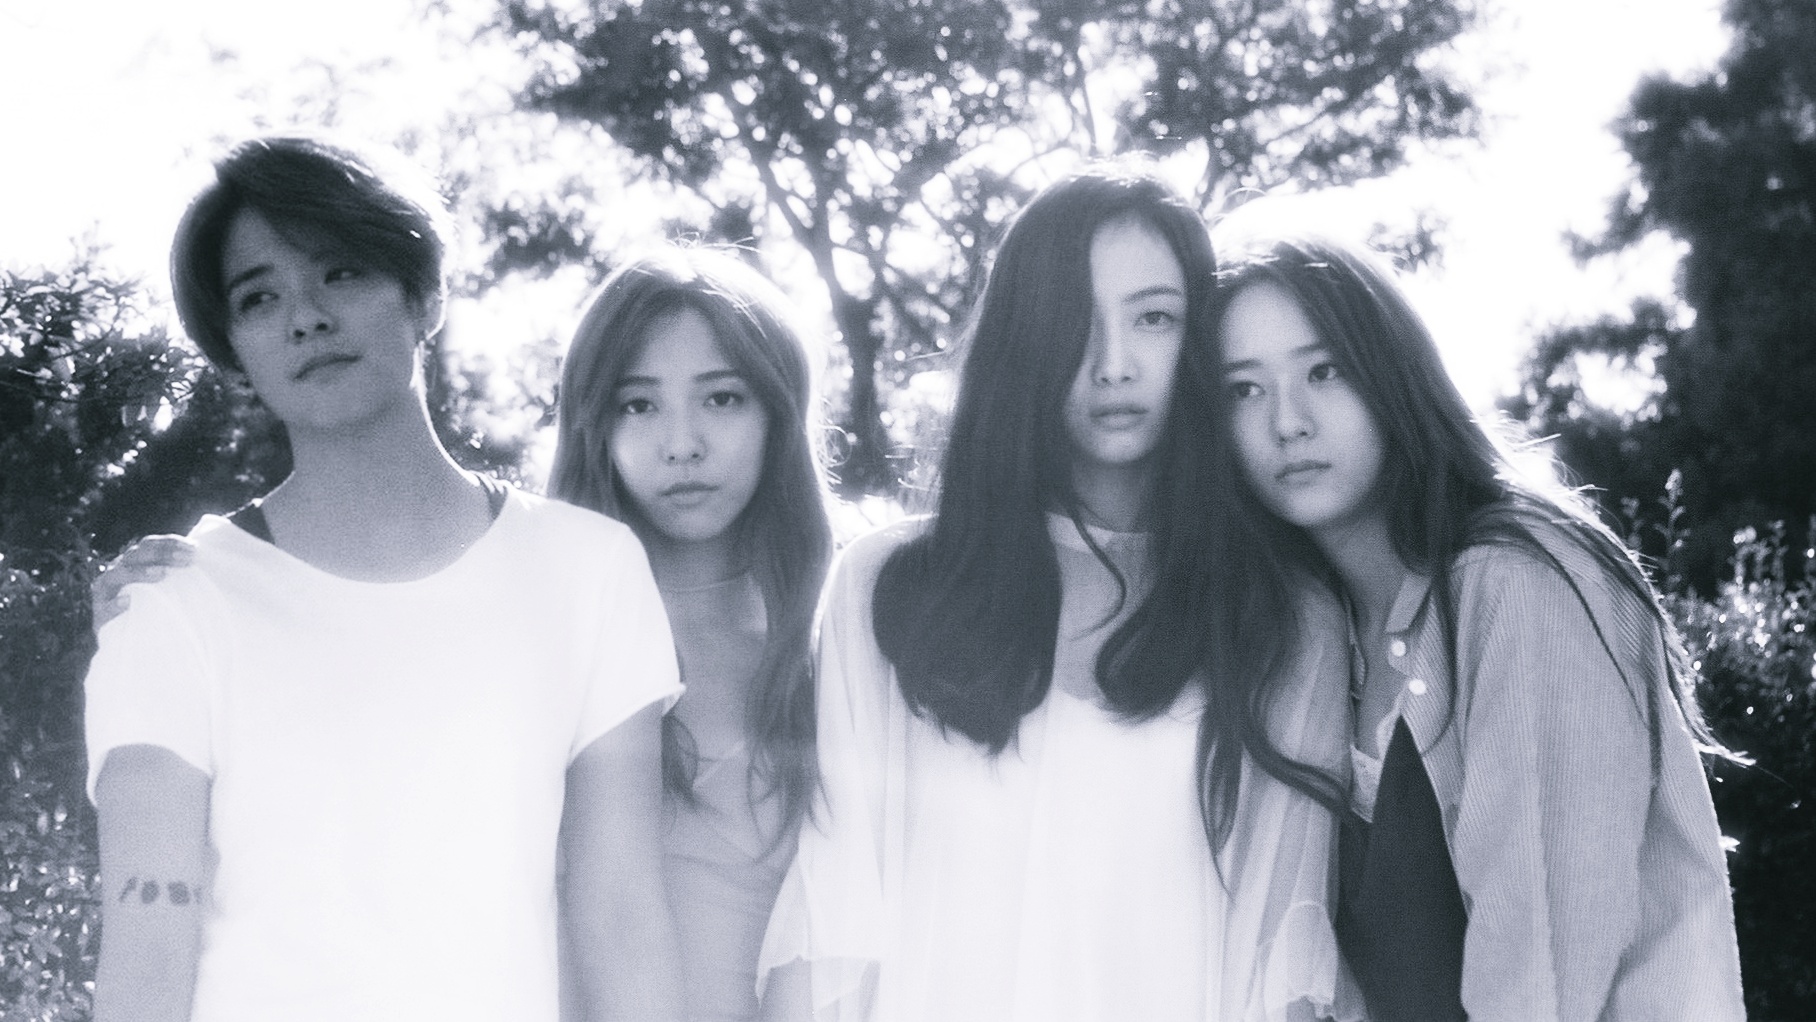 f(x) mistreatment by SM Entertainment A reminder of the dark side of K-Pop industry